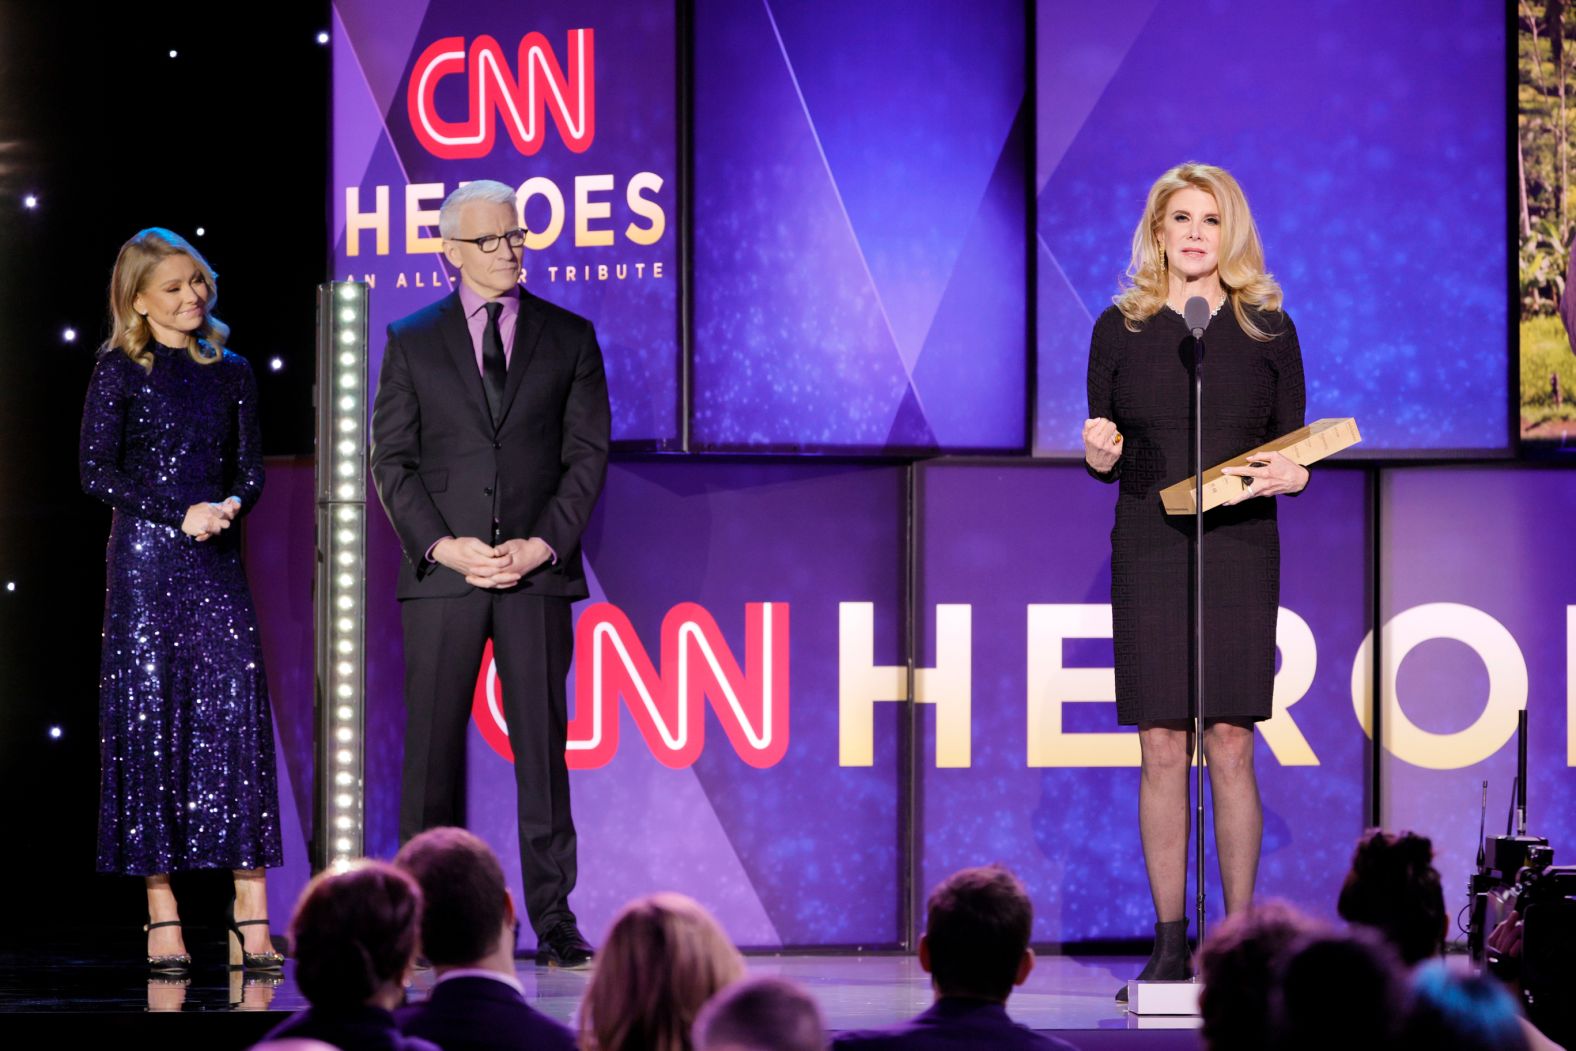 2021 CNN Hero Dr. Patricia Gordon speaks onstage during The 15th Annual 'CNN Heroes: All-Star Tribute.' Dr. Gordon is a radiation oncologist and the founder of the non-profit <a href="index.php?page=&url=https%3A%2F%2Fcurecervicalcancer.org%2F" target="_blank" target="_blank">CureCervicalCancer</a>. After 27 years, Gordon left her private practice in 2014 to devote all her time to CureCervicalCancer. She takes no salary.